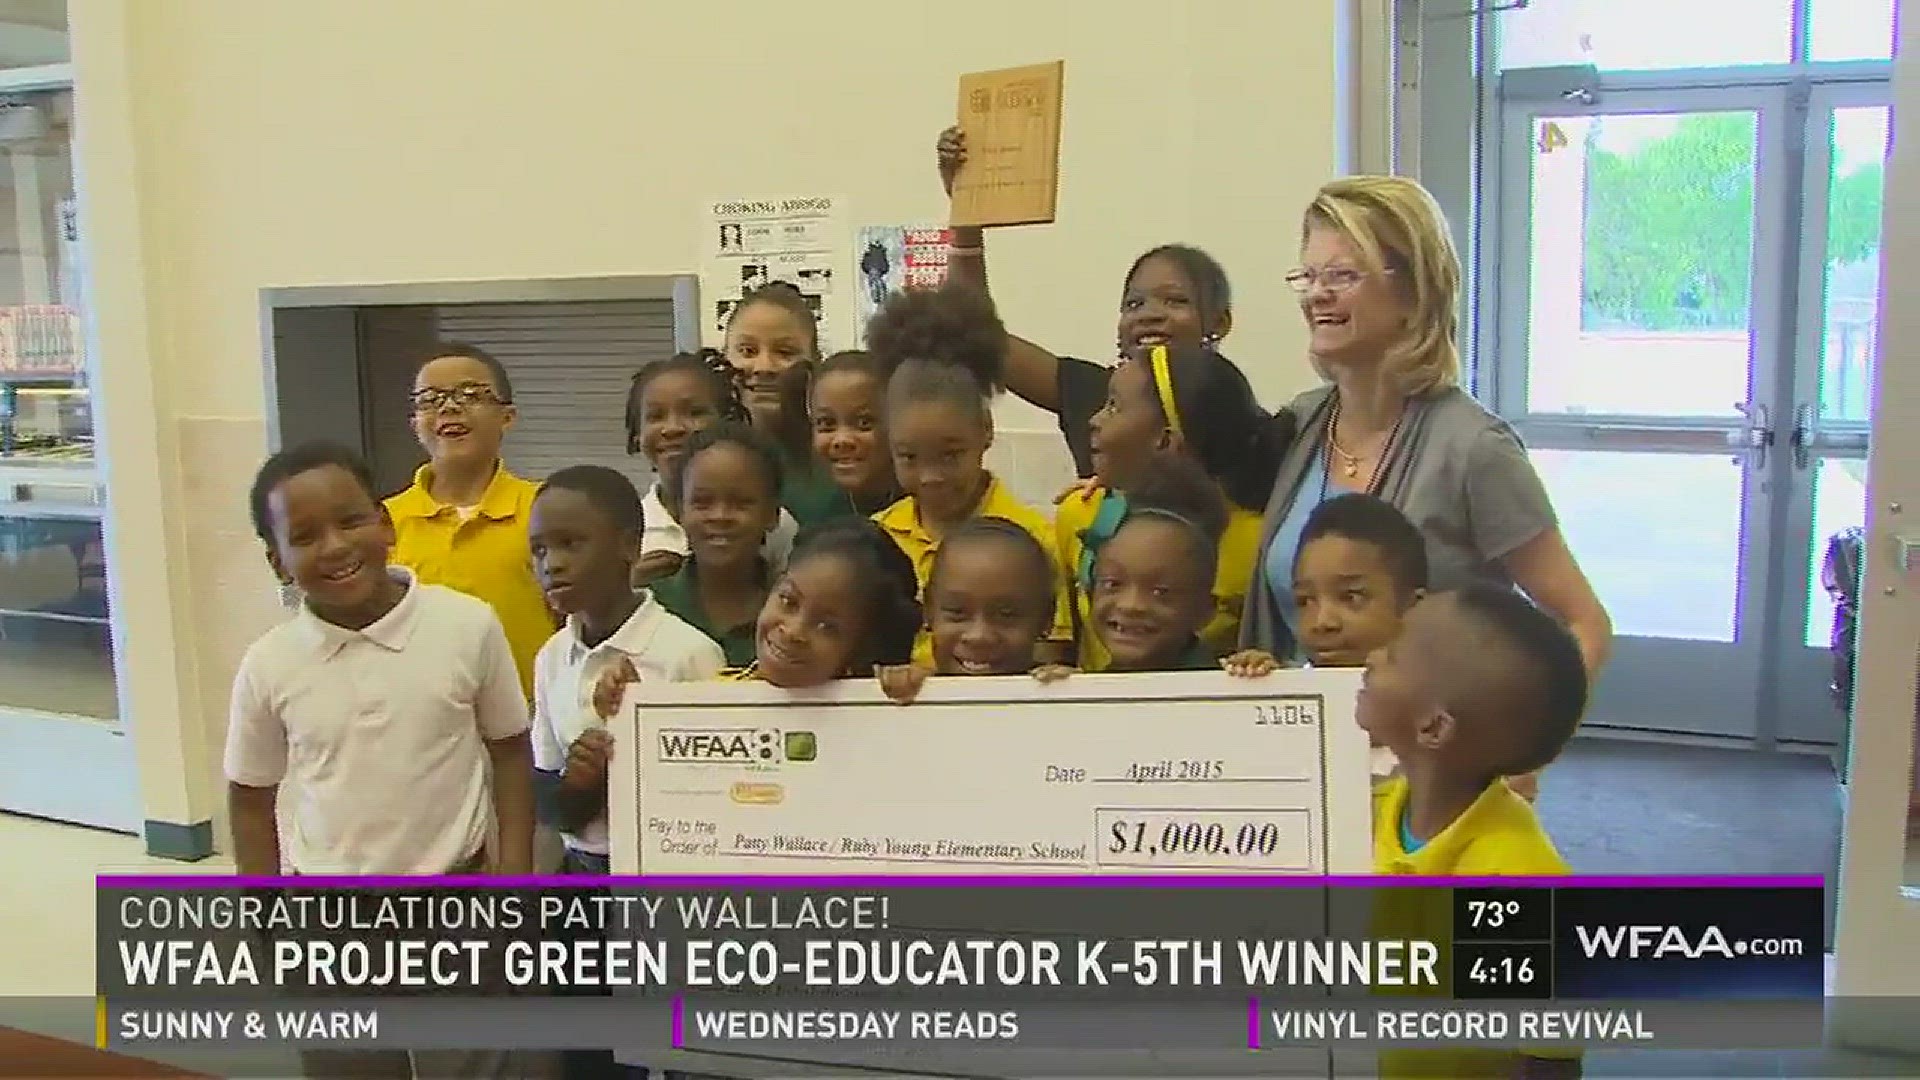 Each year WFAA's "Project Green" celebrates teachers who are "eco-educators." Master gardener Patty Wallace is the winner in the K-5 category.